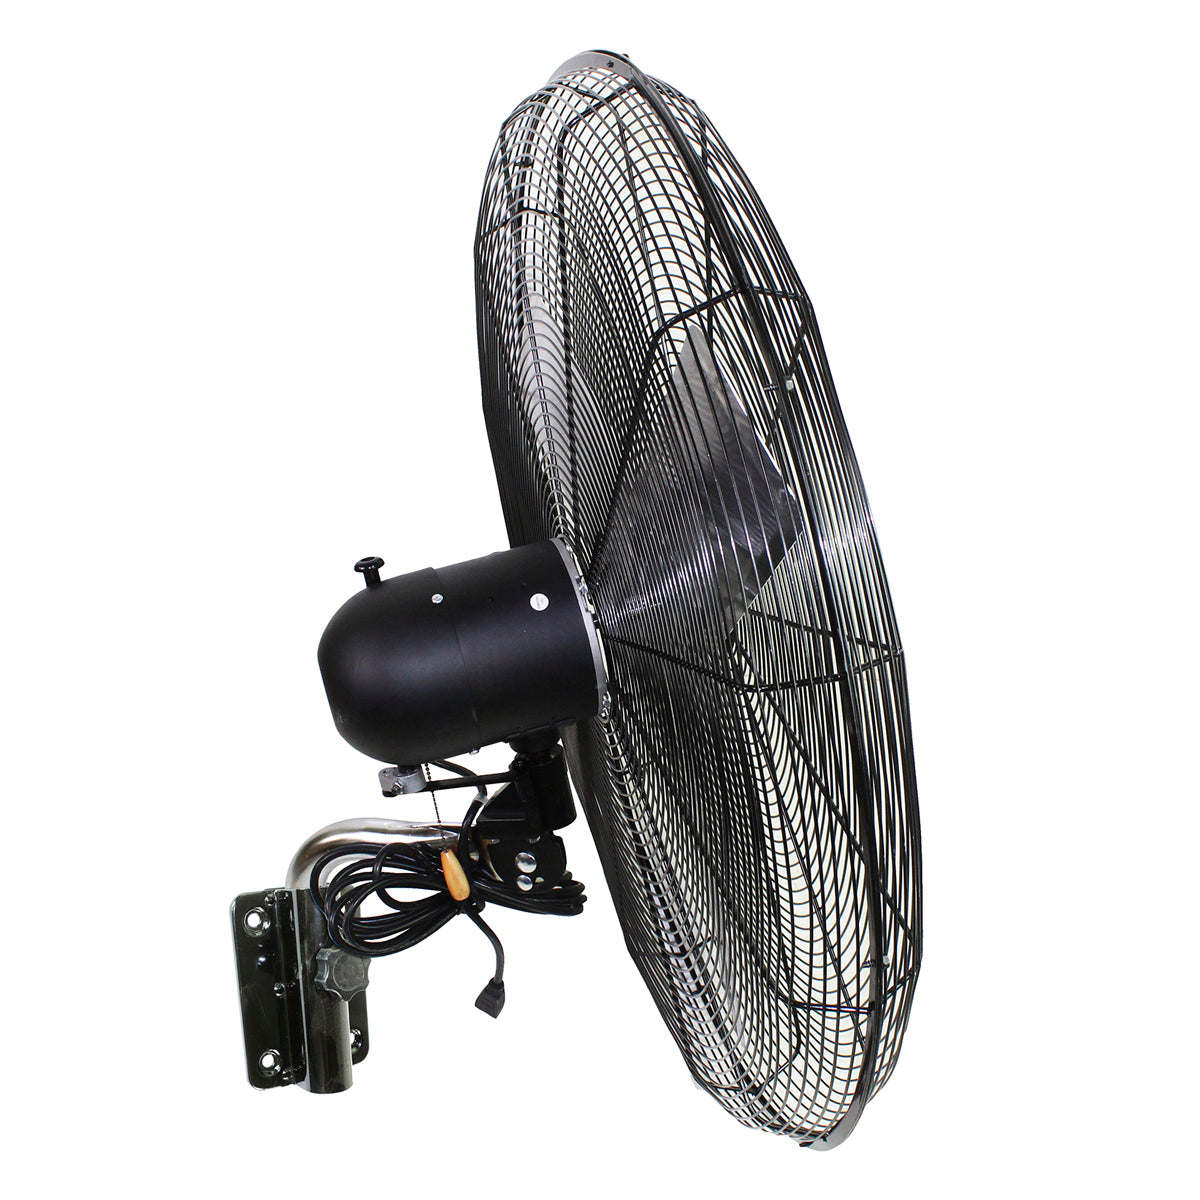 Maxx Air 30 In. 3-Speed Tilting Wall Mount Fan with Oscillation